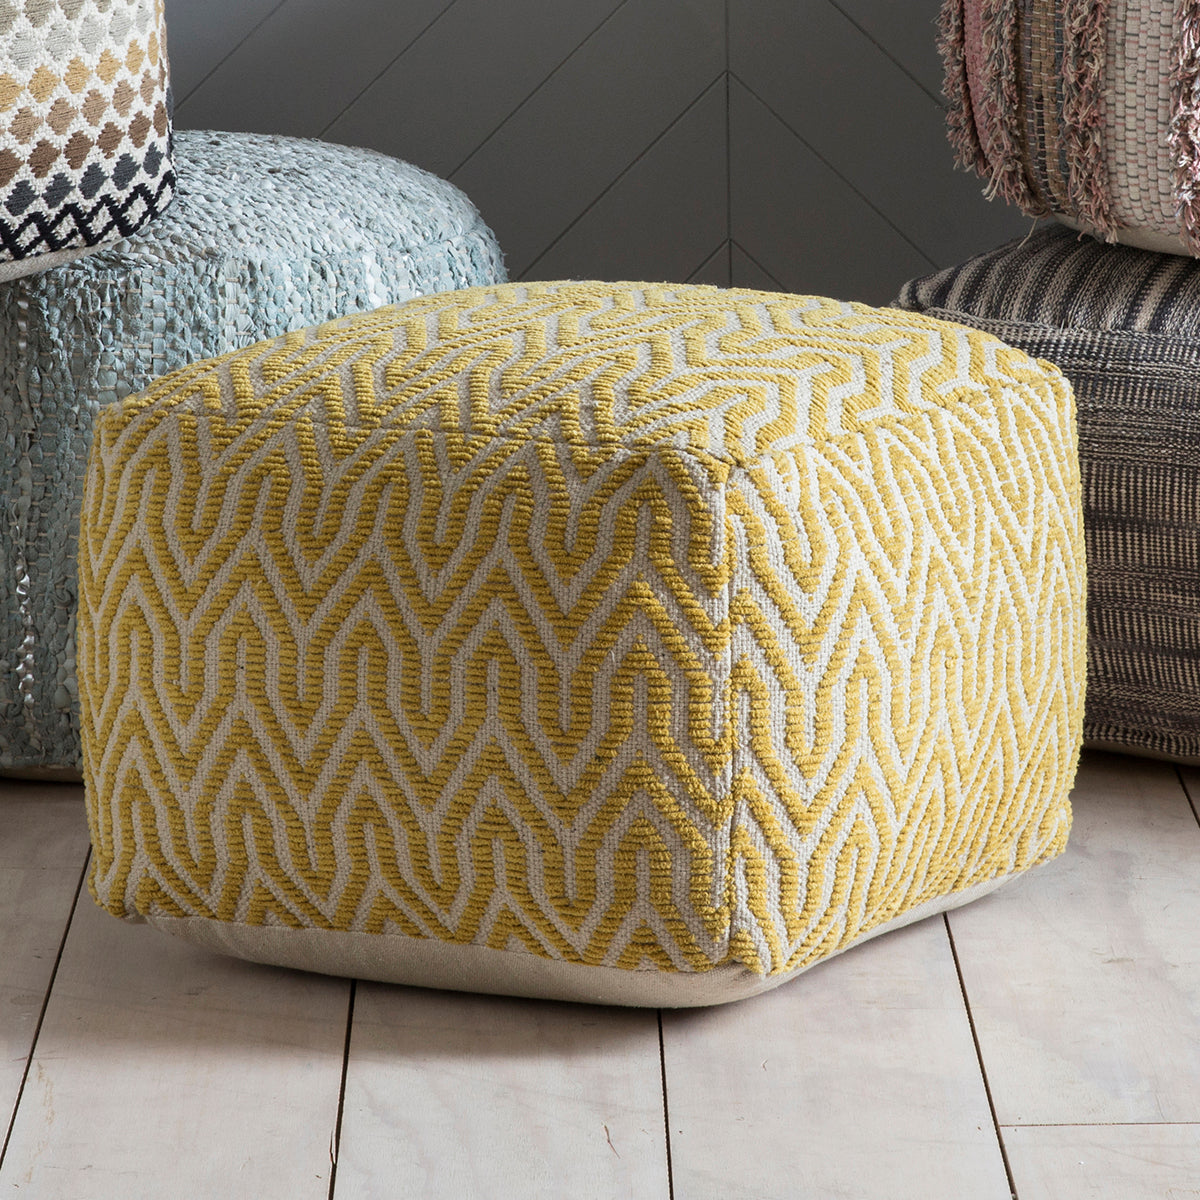 Load image into Gallery viewer, A yellow and grey Stromstad Pouffe Ochre sitting on top of a wooden floor from Kikiathome.co.uk, perfect for interior decor and home furniture.
